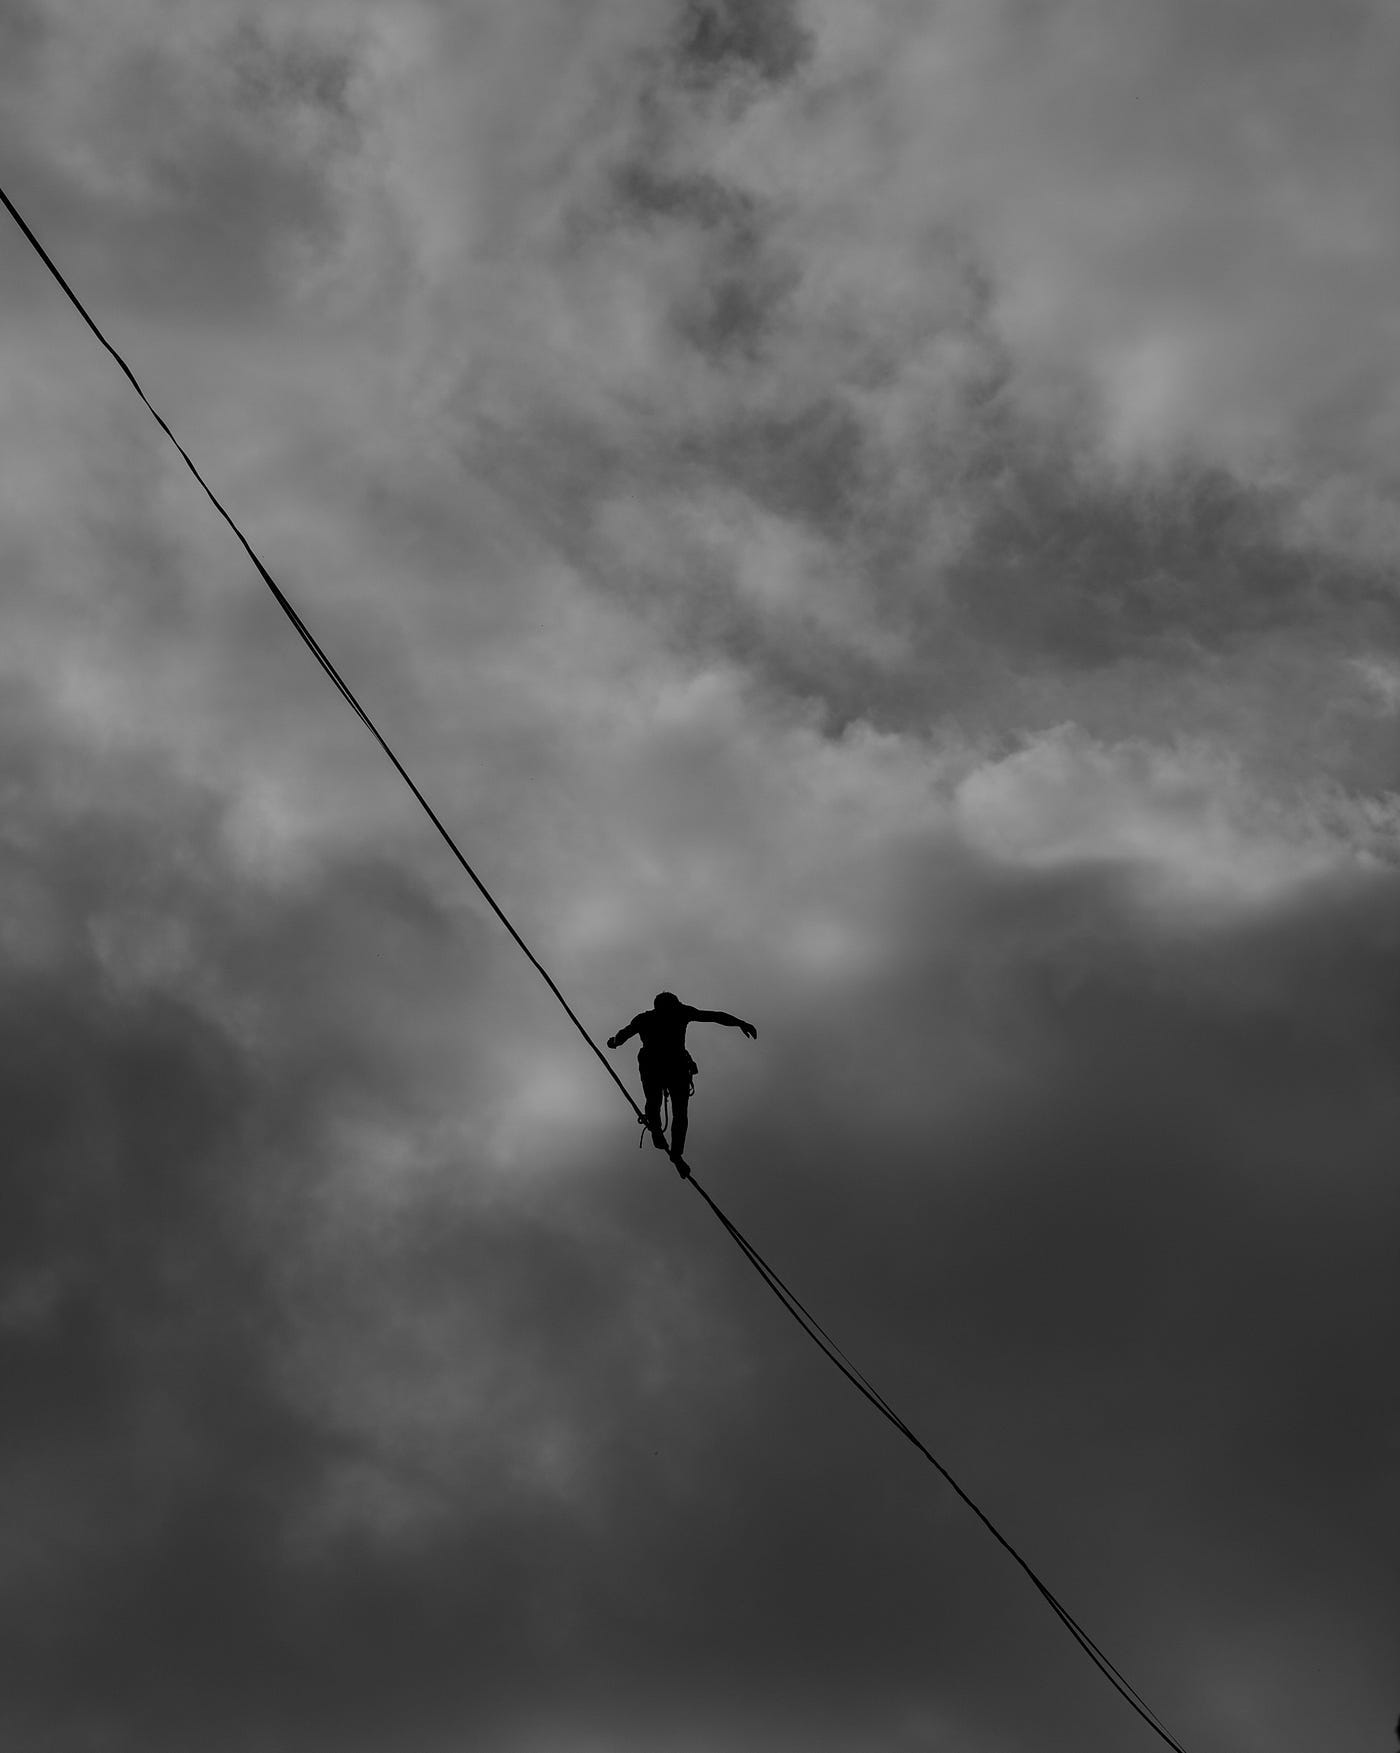 Walking the Tightrope: A Metaphor for Self-Isolation From the Mind of a  10-Year-Old | by Nick Knopik | Medium